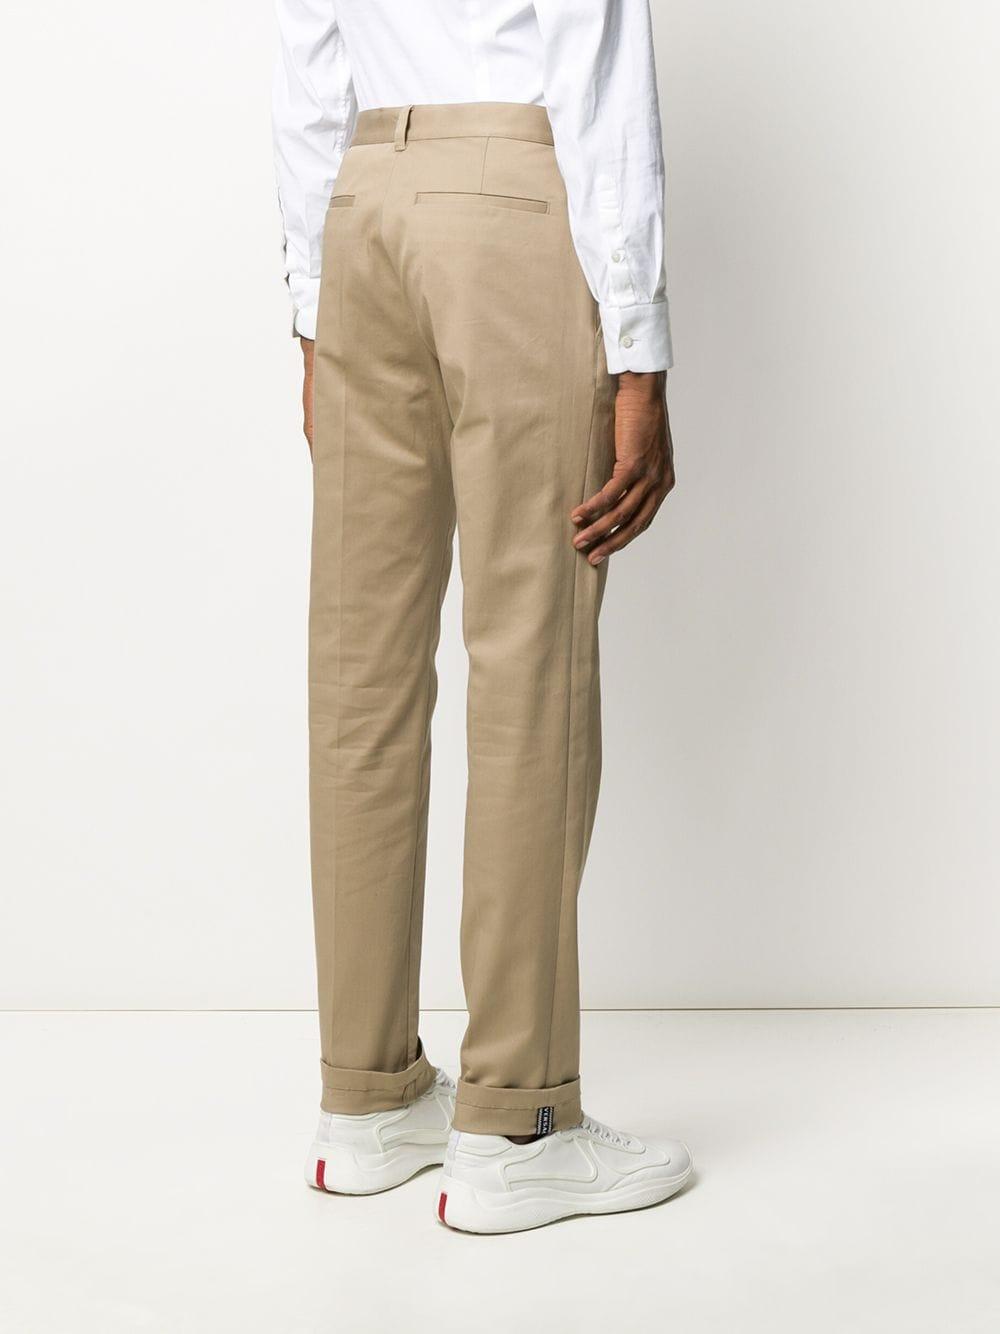 Versace Cotton Slim-fit Chinos in Natural for Men - Lyst